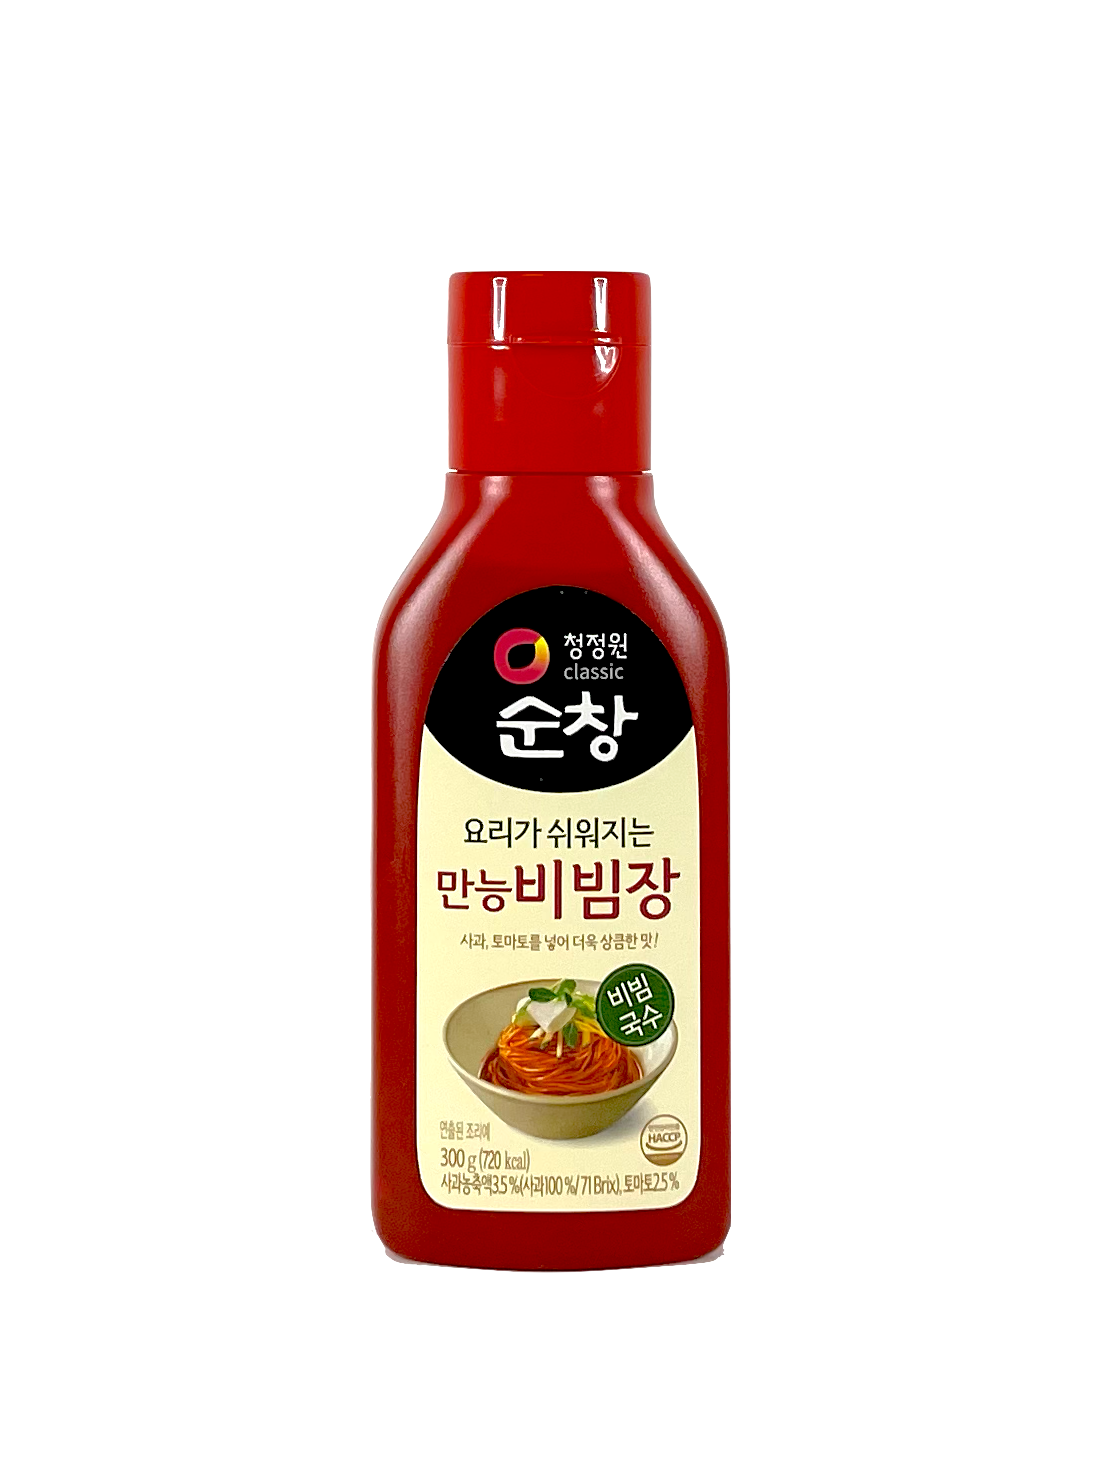 Spicy / Sour Red Pepper Sauce For Cold Noodles / Dishes 300g CJW Korean